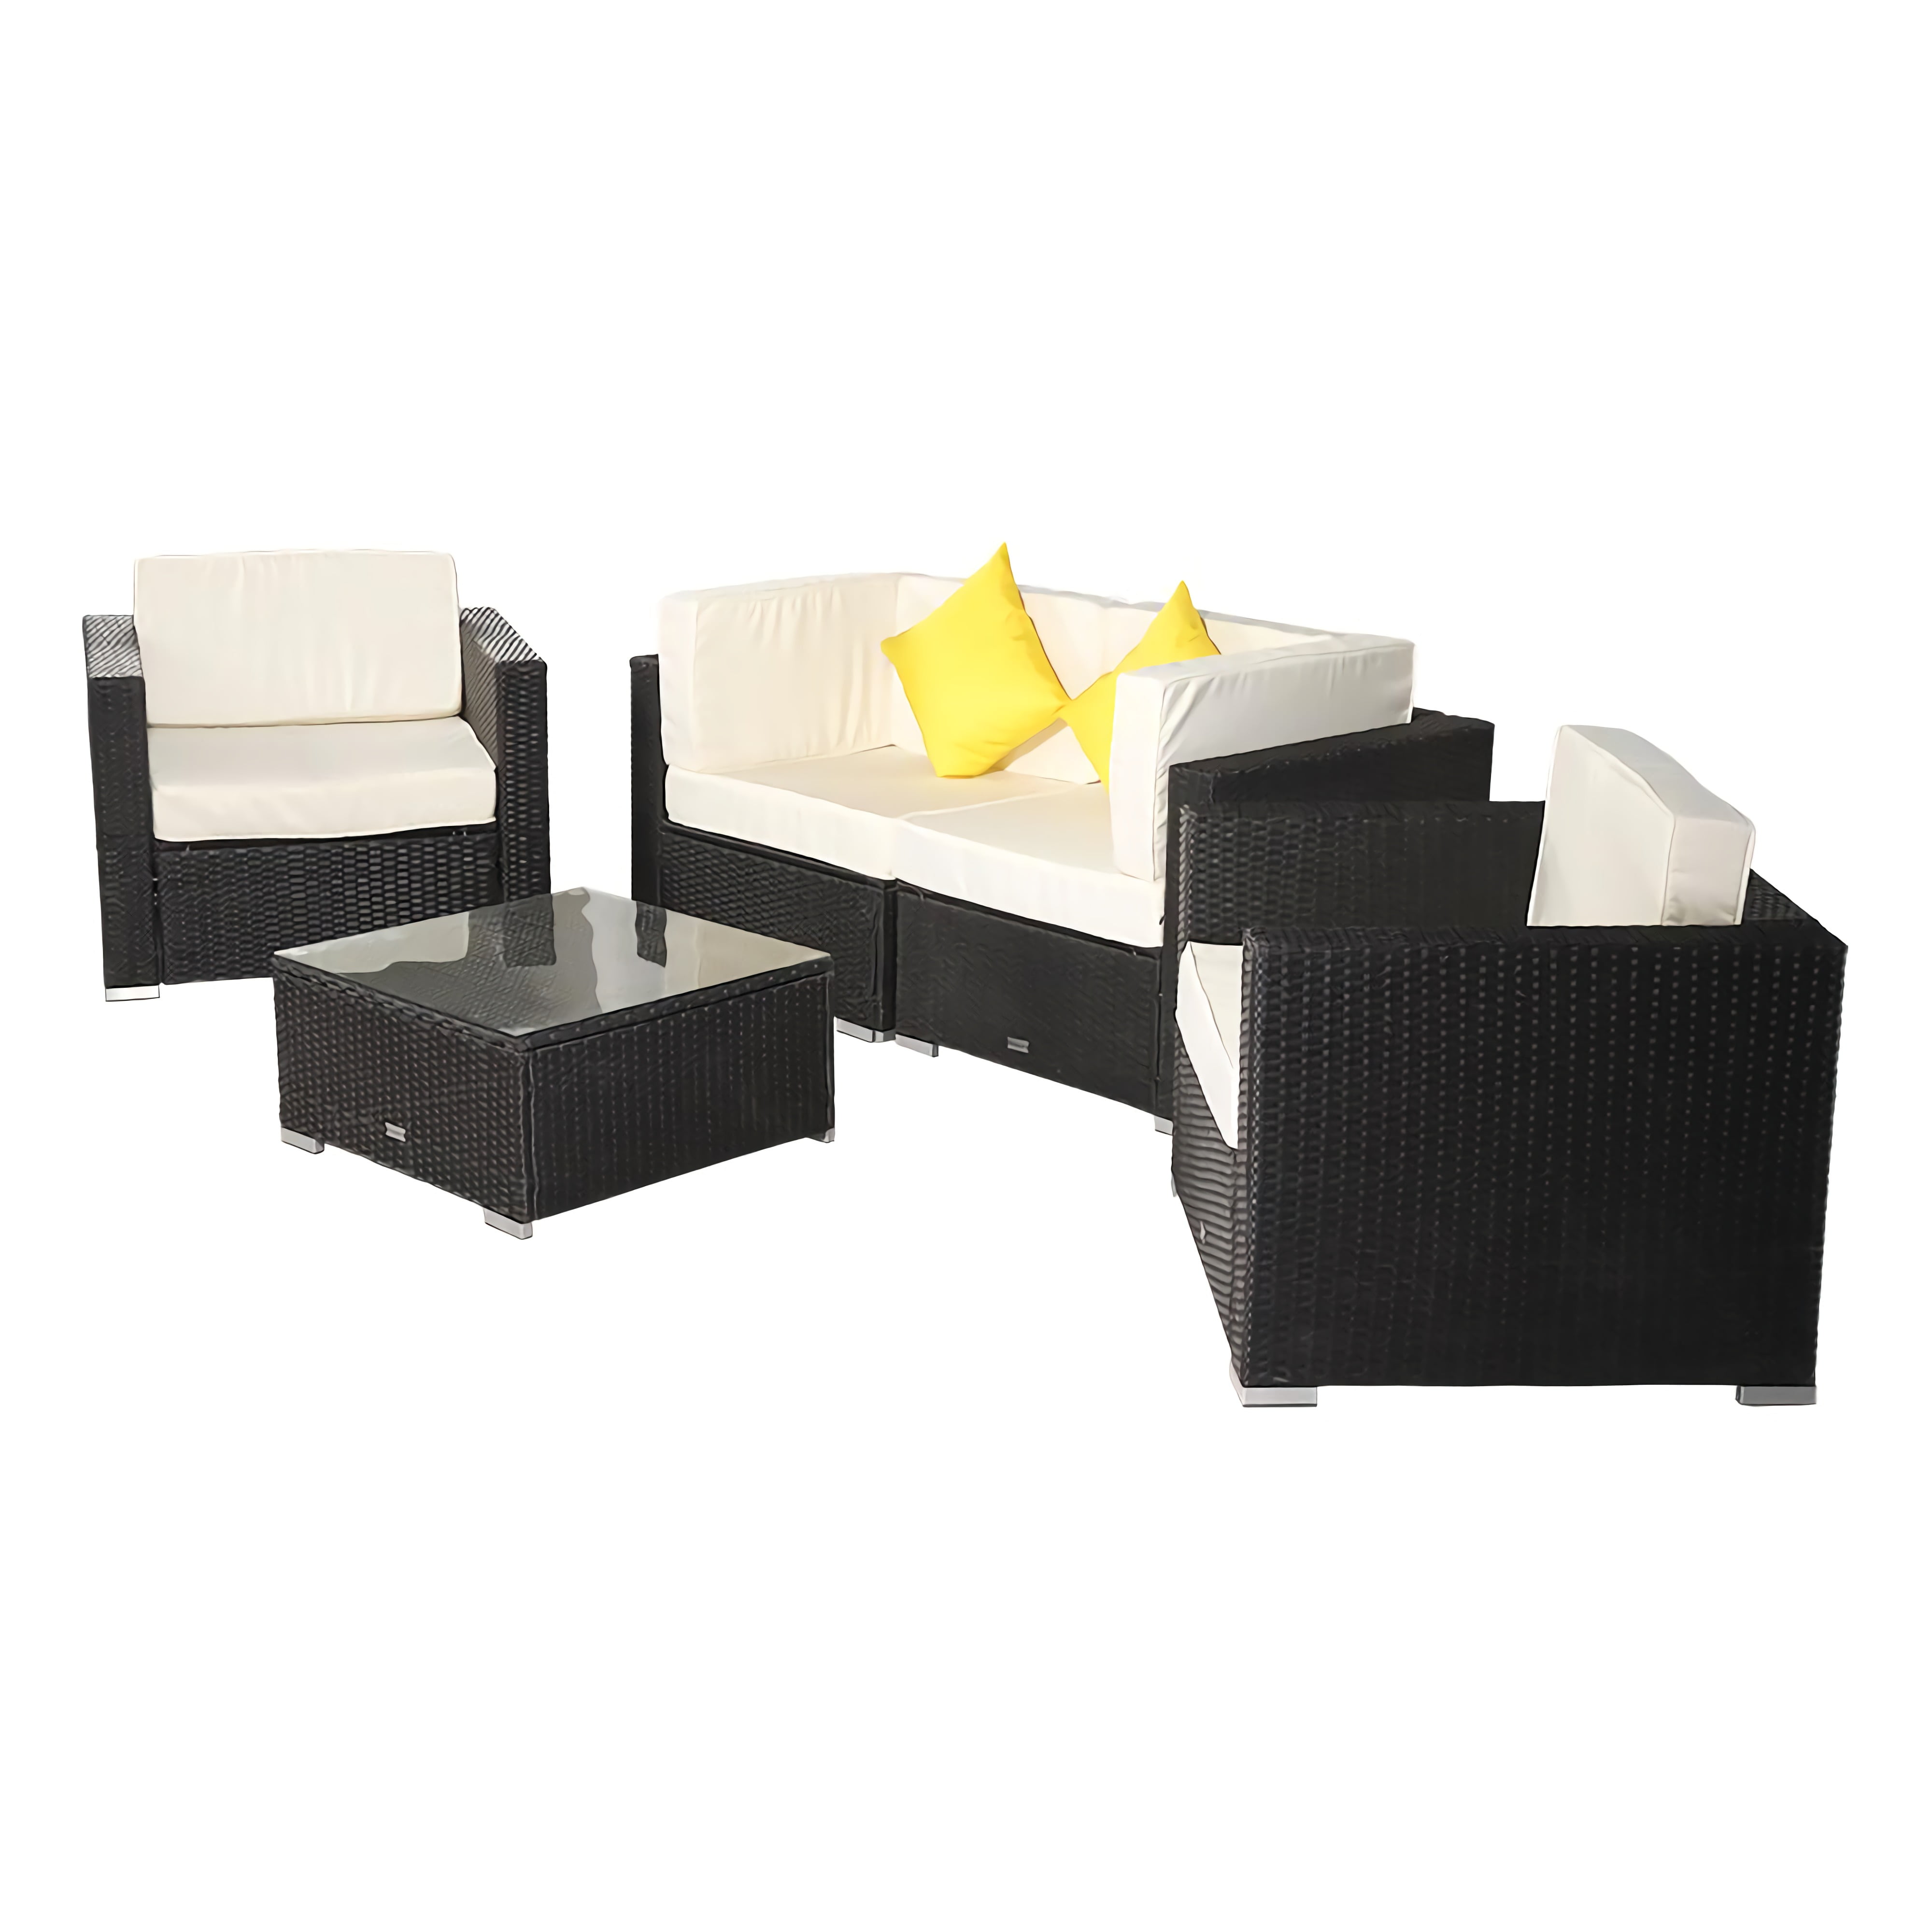 5 Pieces Outdoor Patio Furniture Conversation Sets,w/ 4 Chairs,Glass